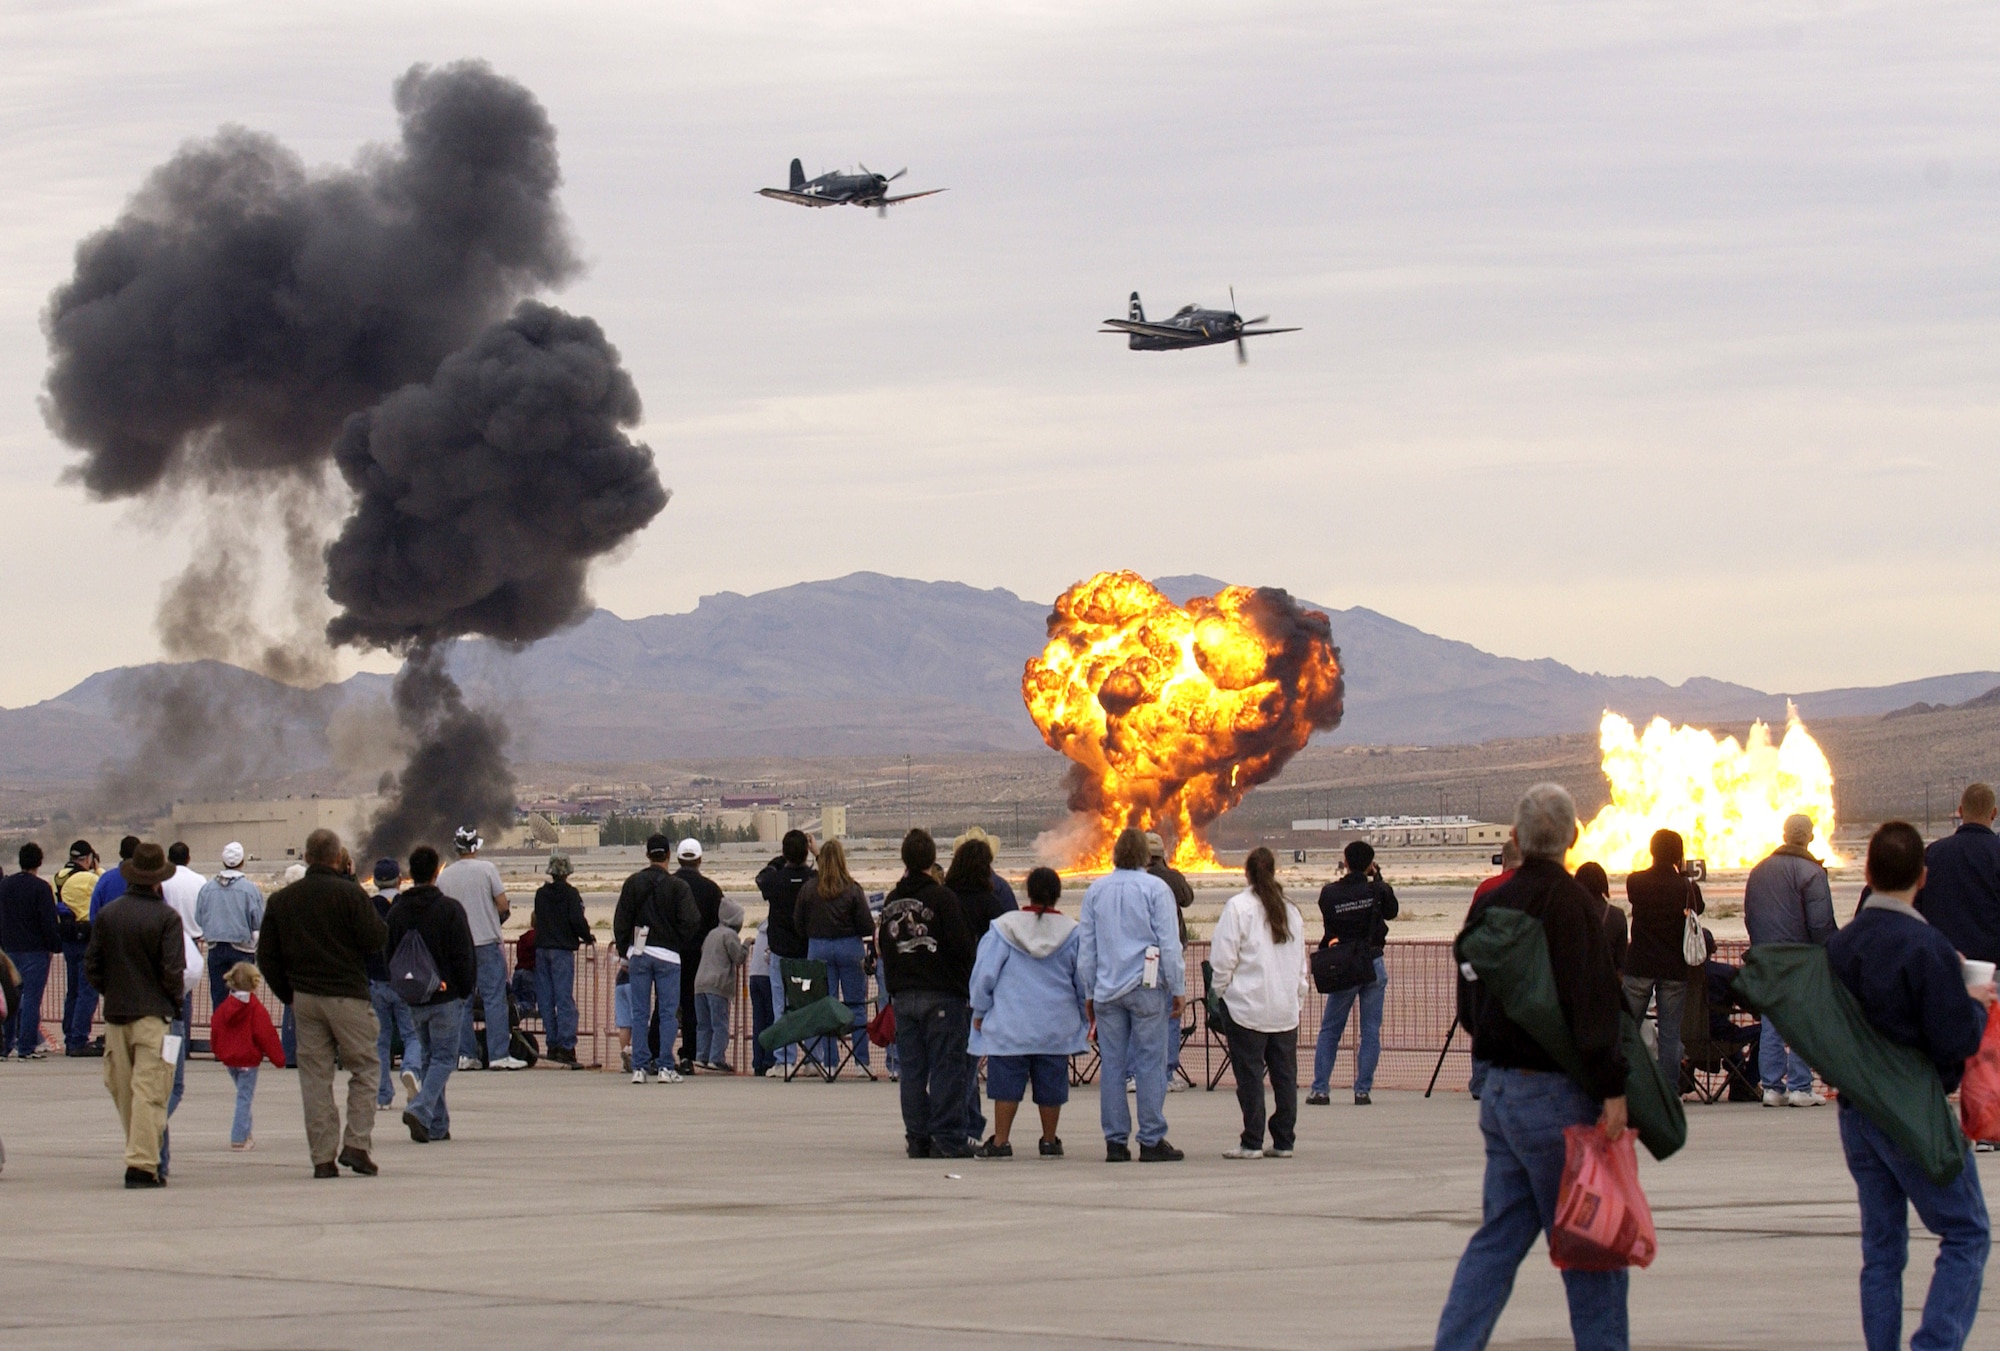 Air show spectators get a close look at a Korean War aerial re-enactment during Aviation Nation 2006 Nov. 11 at Nellis Air Force Base, Nev. The show was held Nov. 11 and 12. (U.S. Air Force photo/Master Sgt. Kevin J. Gruenwald)